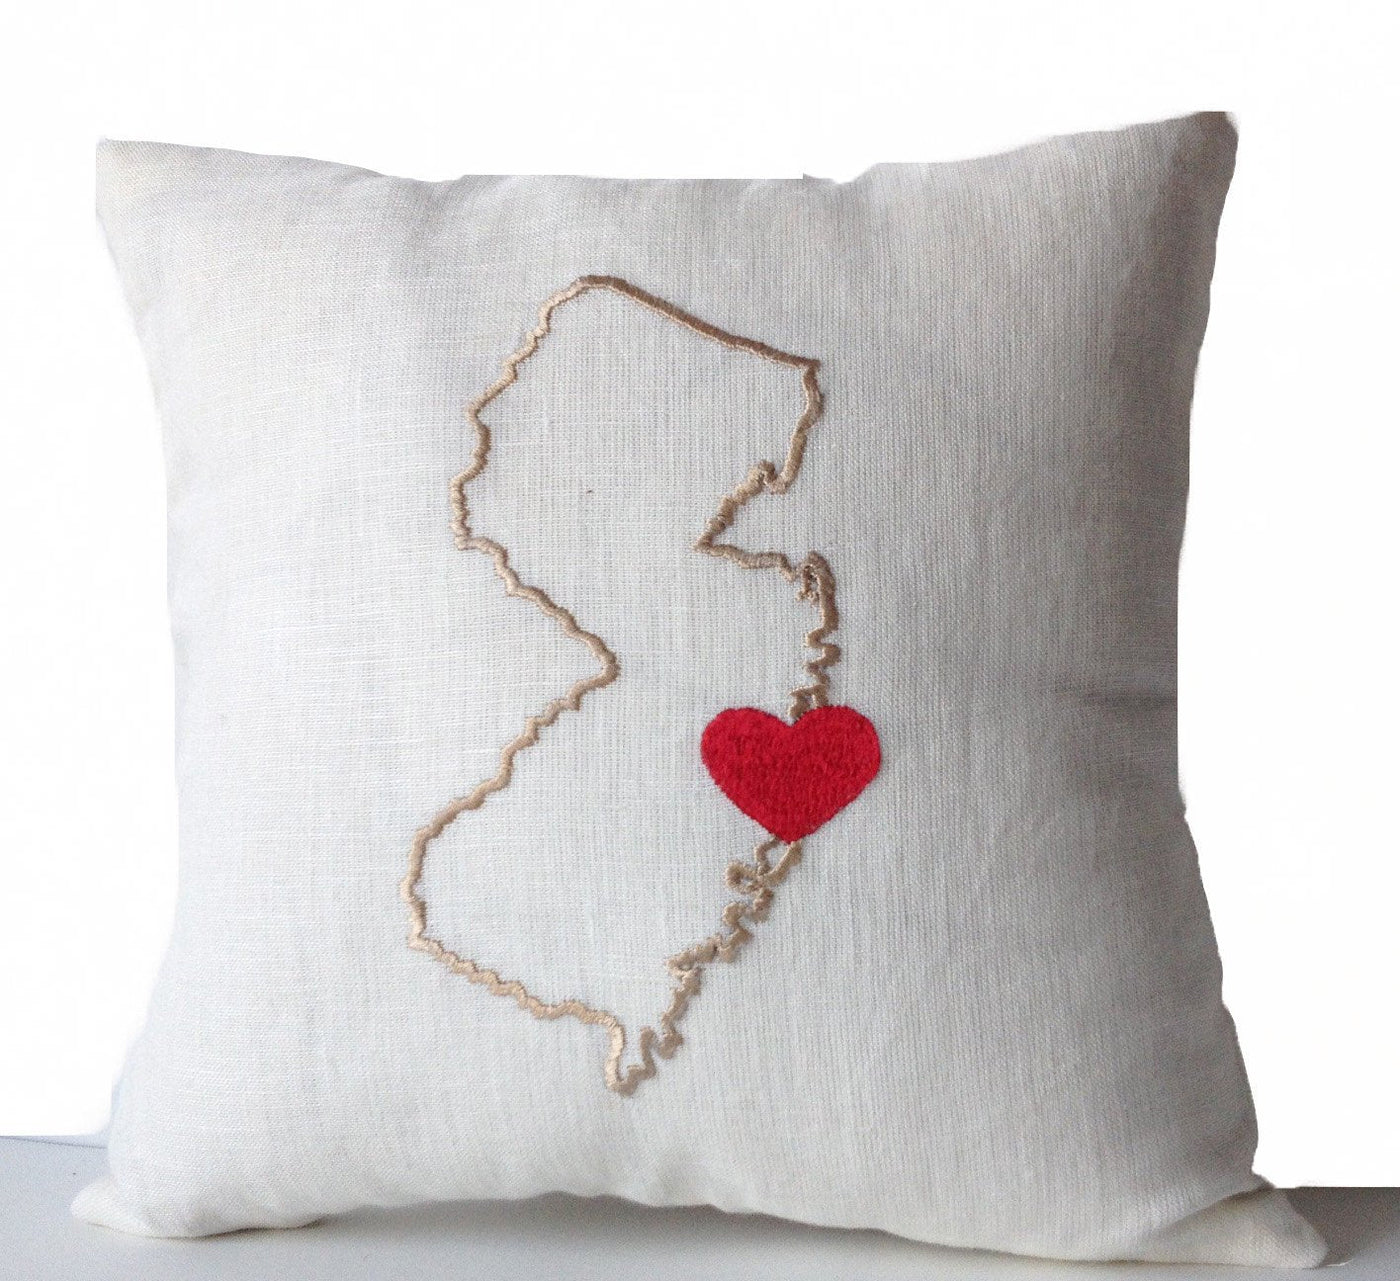 Dorm Pillow, State Map Pillow, Ivory Linen Pillow Cover, Customize State City Pillow by Amore Beauté